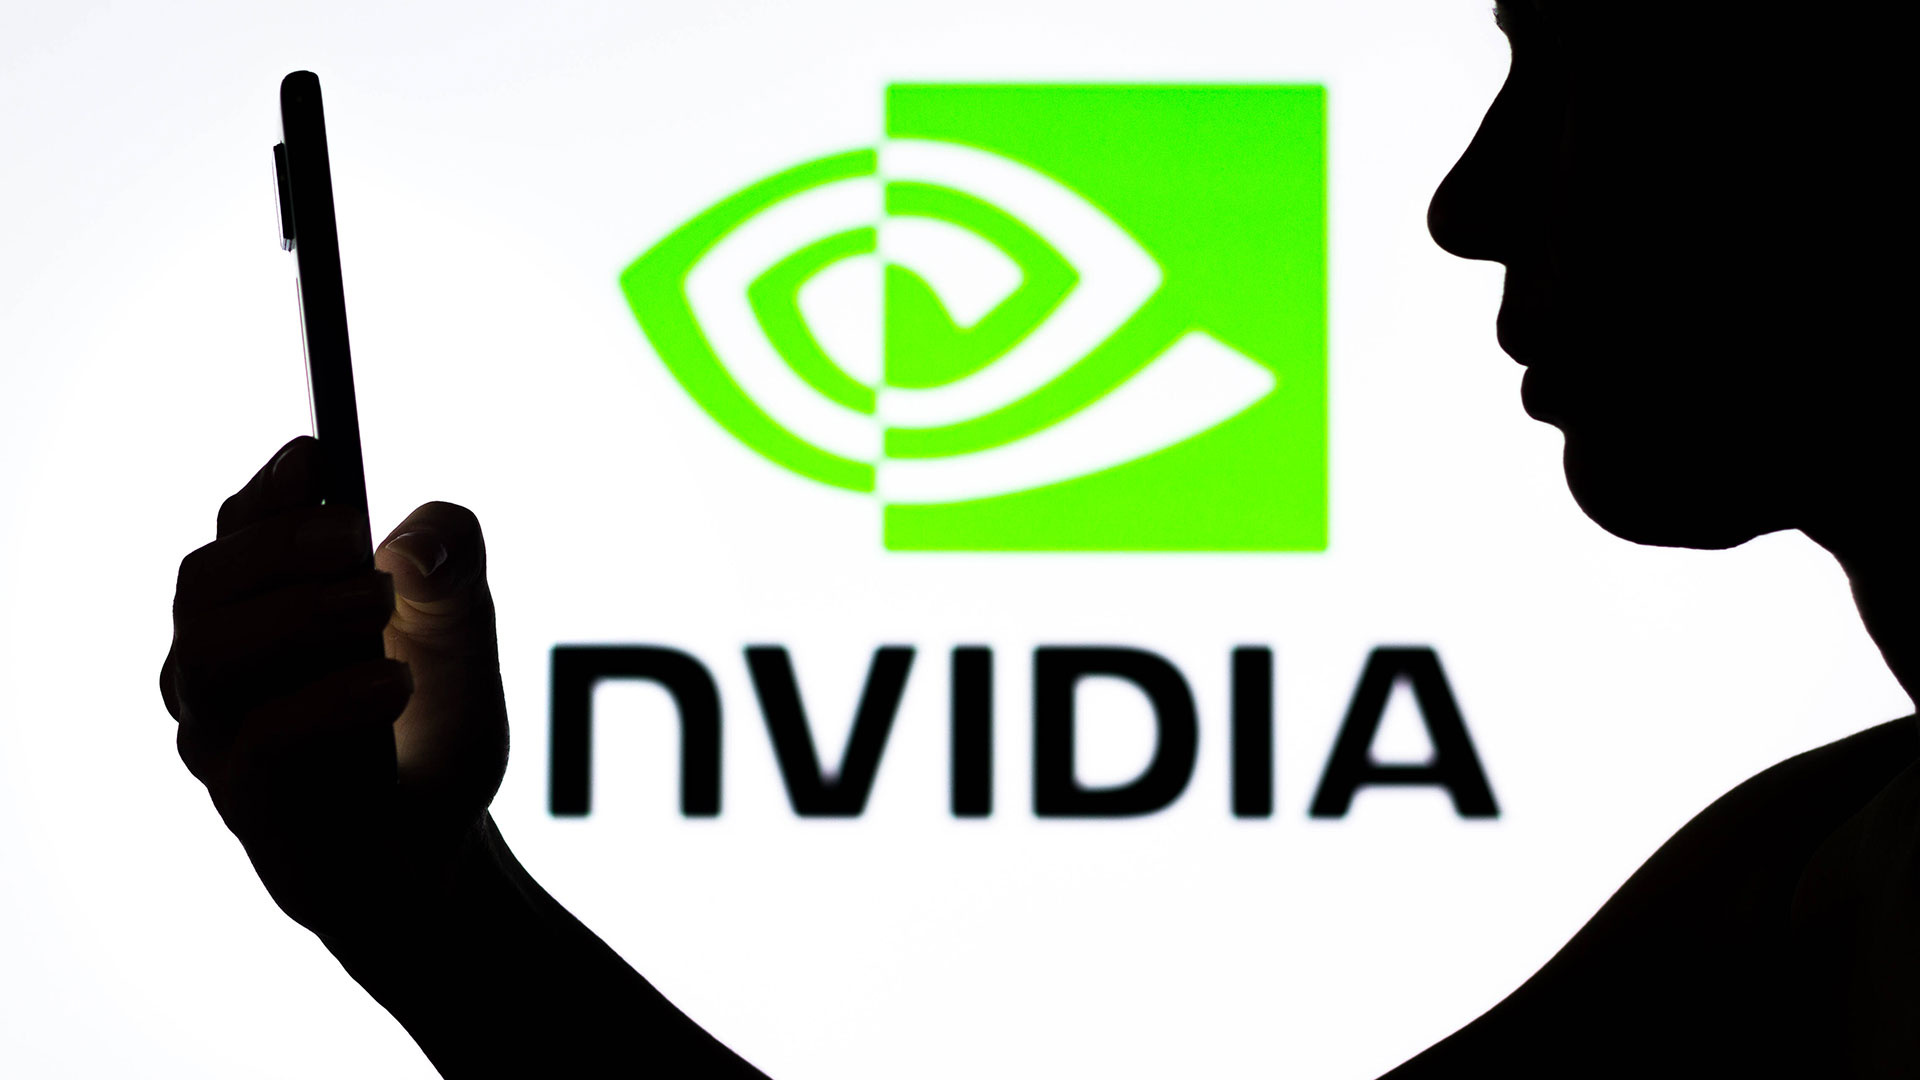 Nvidia: Based in Santa Clara, The company was established in 1993 by Jensen Huang, Curtis Priem, and Chris Malachowsky. 1920x1080 Full HD Wallpaper.